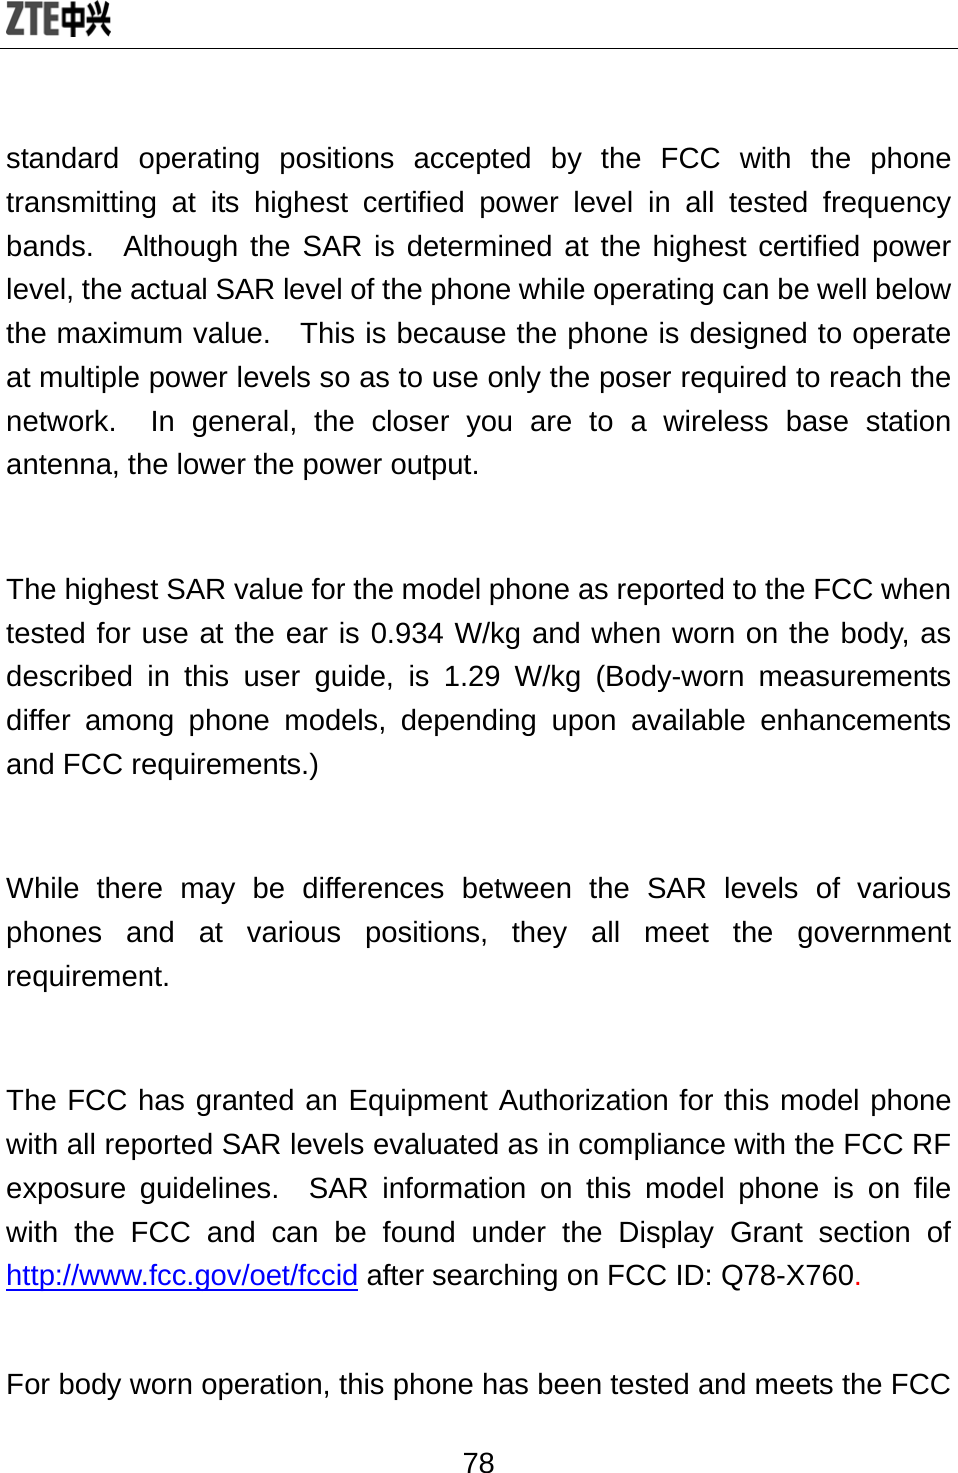  78 standard operating positions accepted by the FCC with the phone transmitting at its highest certified power level in all tested frequency bands.  Although the SAR is determined at the highest certified power level, the actual SAR level of the phone while operating can be well below the maximum value.   This is because the phone is designed to operate at multiple power levels so as to use only the poser required to reach the network.  In general, the closer you are to a wireless base station antenna, the lower the power output.  The highest SAR value for the model phone as reported to the FCC when tested for use at the ear is 0.934 W/kg and when worn on the body, as described in this user guide, is 1.29 W/kg (Body-worn measurements differ among phone models, depending upon available enhancements and FCC requirements.)  While there may be differences between the SAR levels of various phones and at various positions, they all meet the government requirement.  The FCC has granted an Equipment Authorization for this model phone with all reported SAR levels evaluated as in compliance with the FCC RF exposure guidelines.  SAR information on this model phone is on file with the FCC and can be found under the Display Grant section of http://www.fcc.gov/oet/fccid after searching on FCC ID: Q78-X760.  For body worn operation, this phone has been tested and meets the FCC 